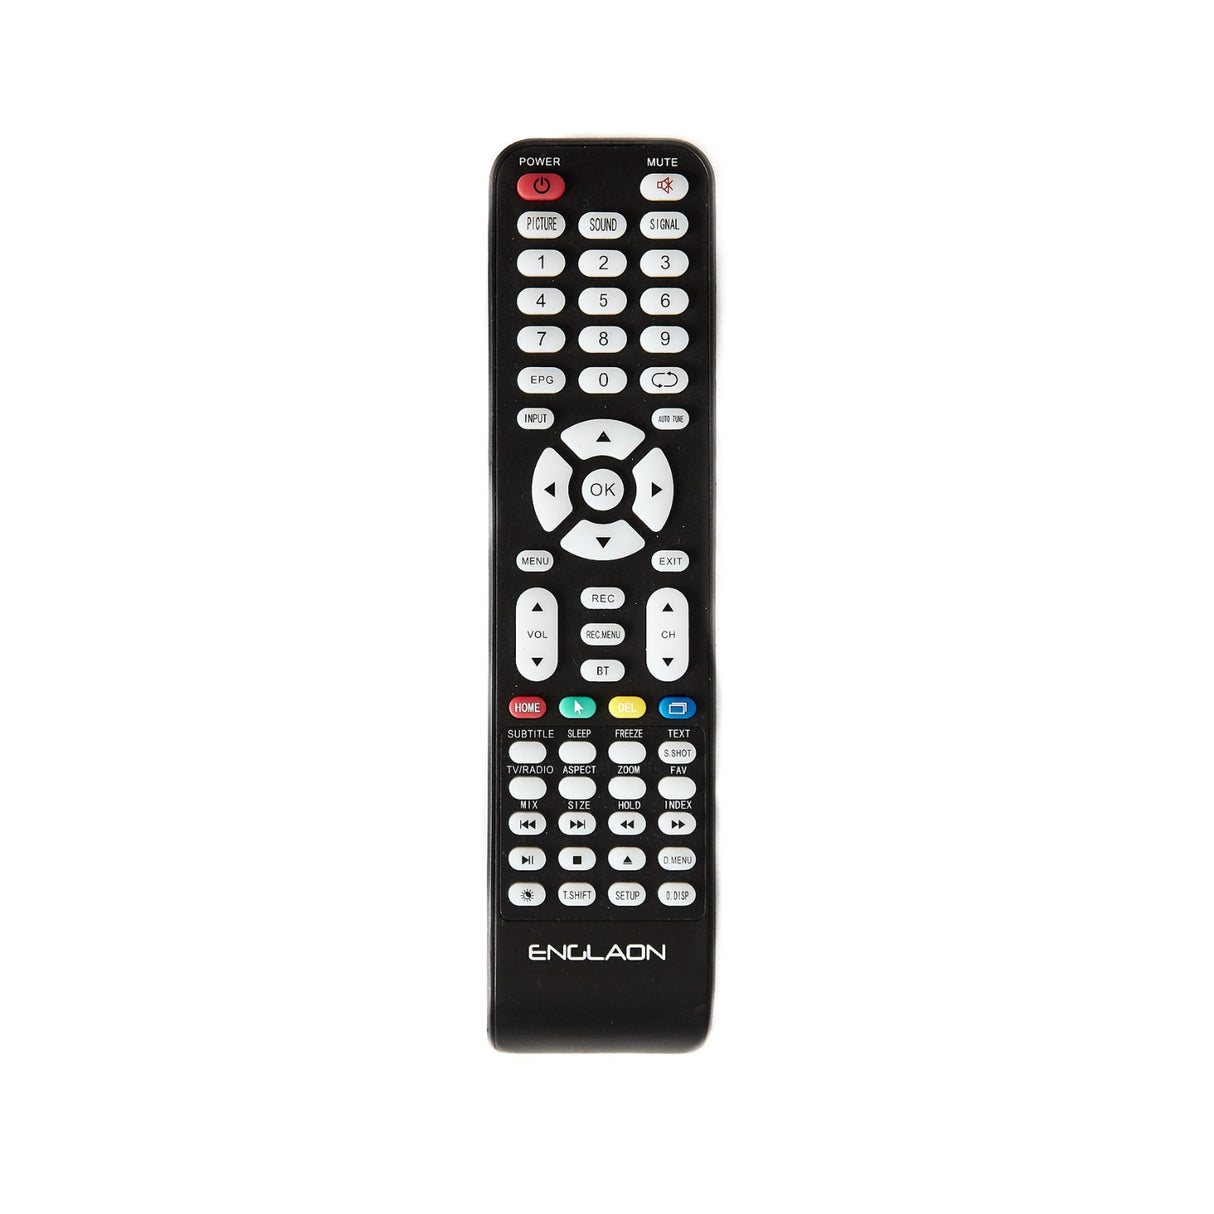 ENGLAON TV remote control for LED TVs